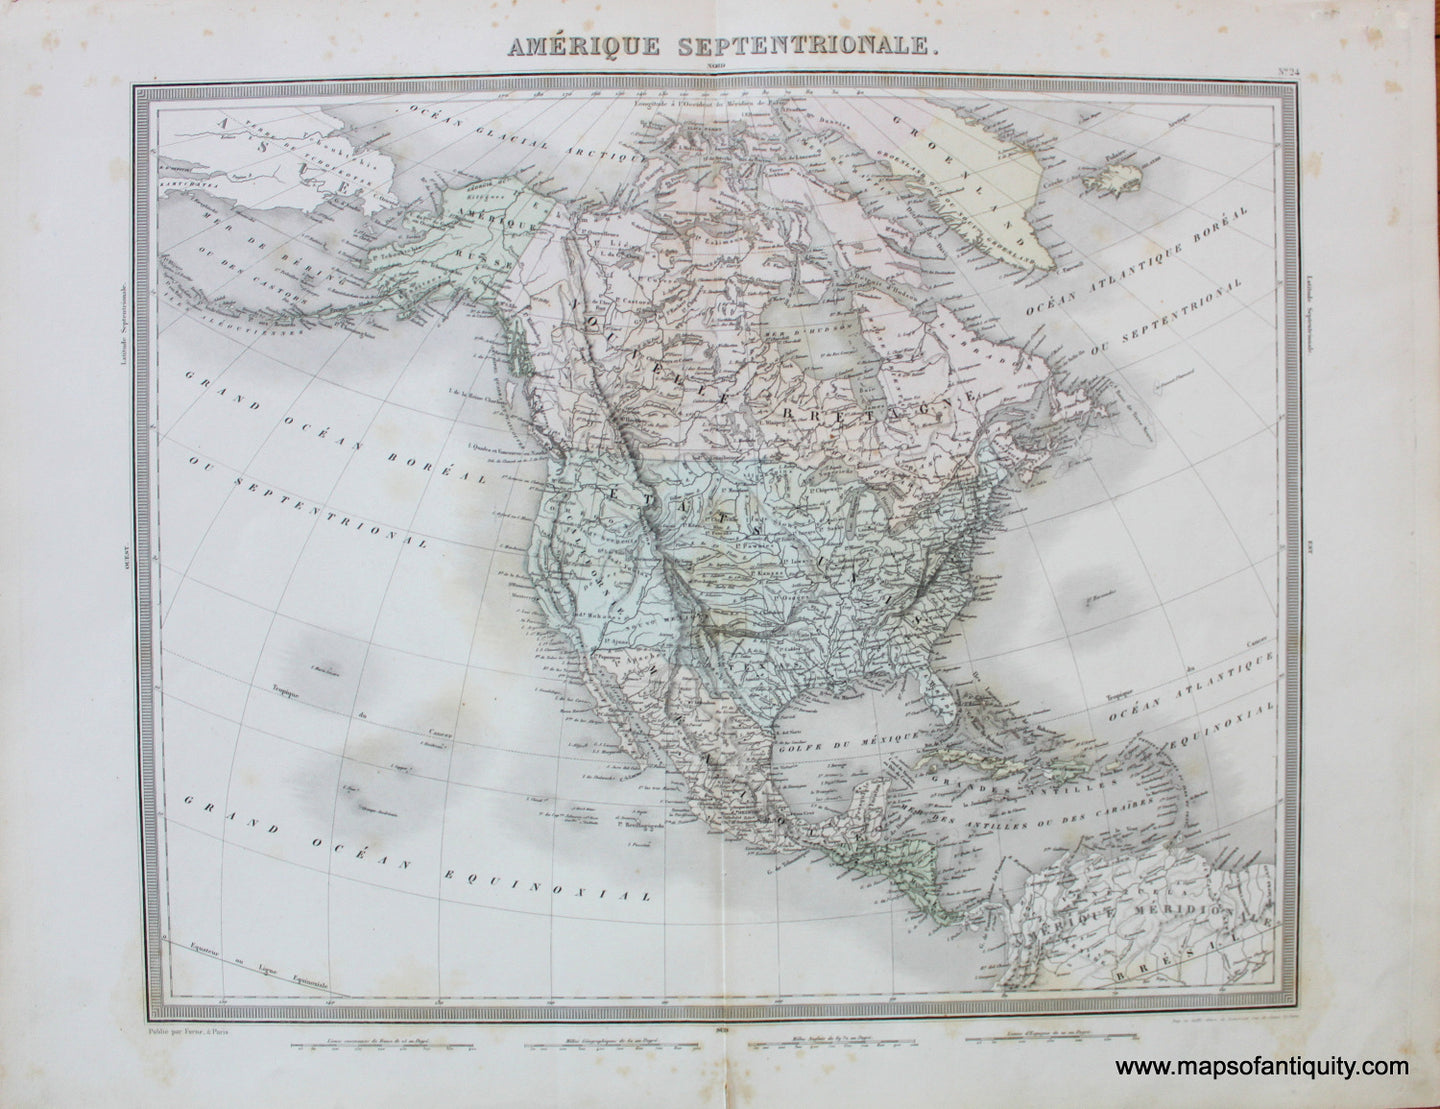 Antique-Hand-Colored-Map-Amerique-Septentrionale-North-America-North-America-General-1860-Lemercier-Maps-Of-Antiquity